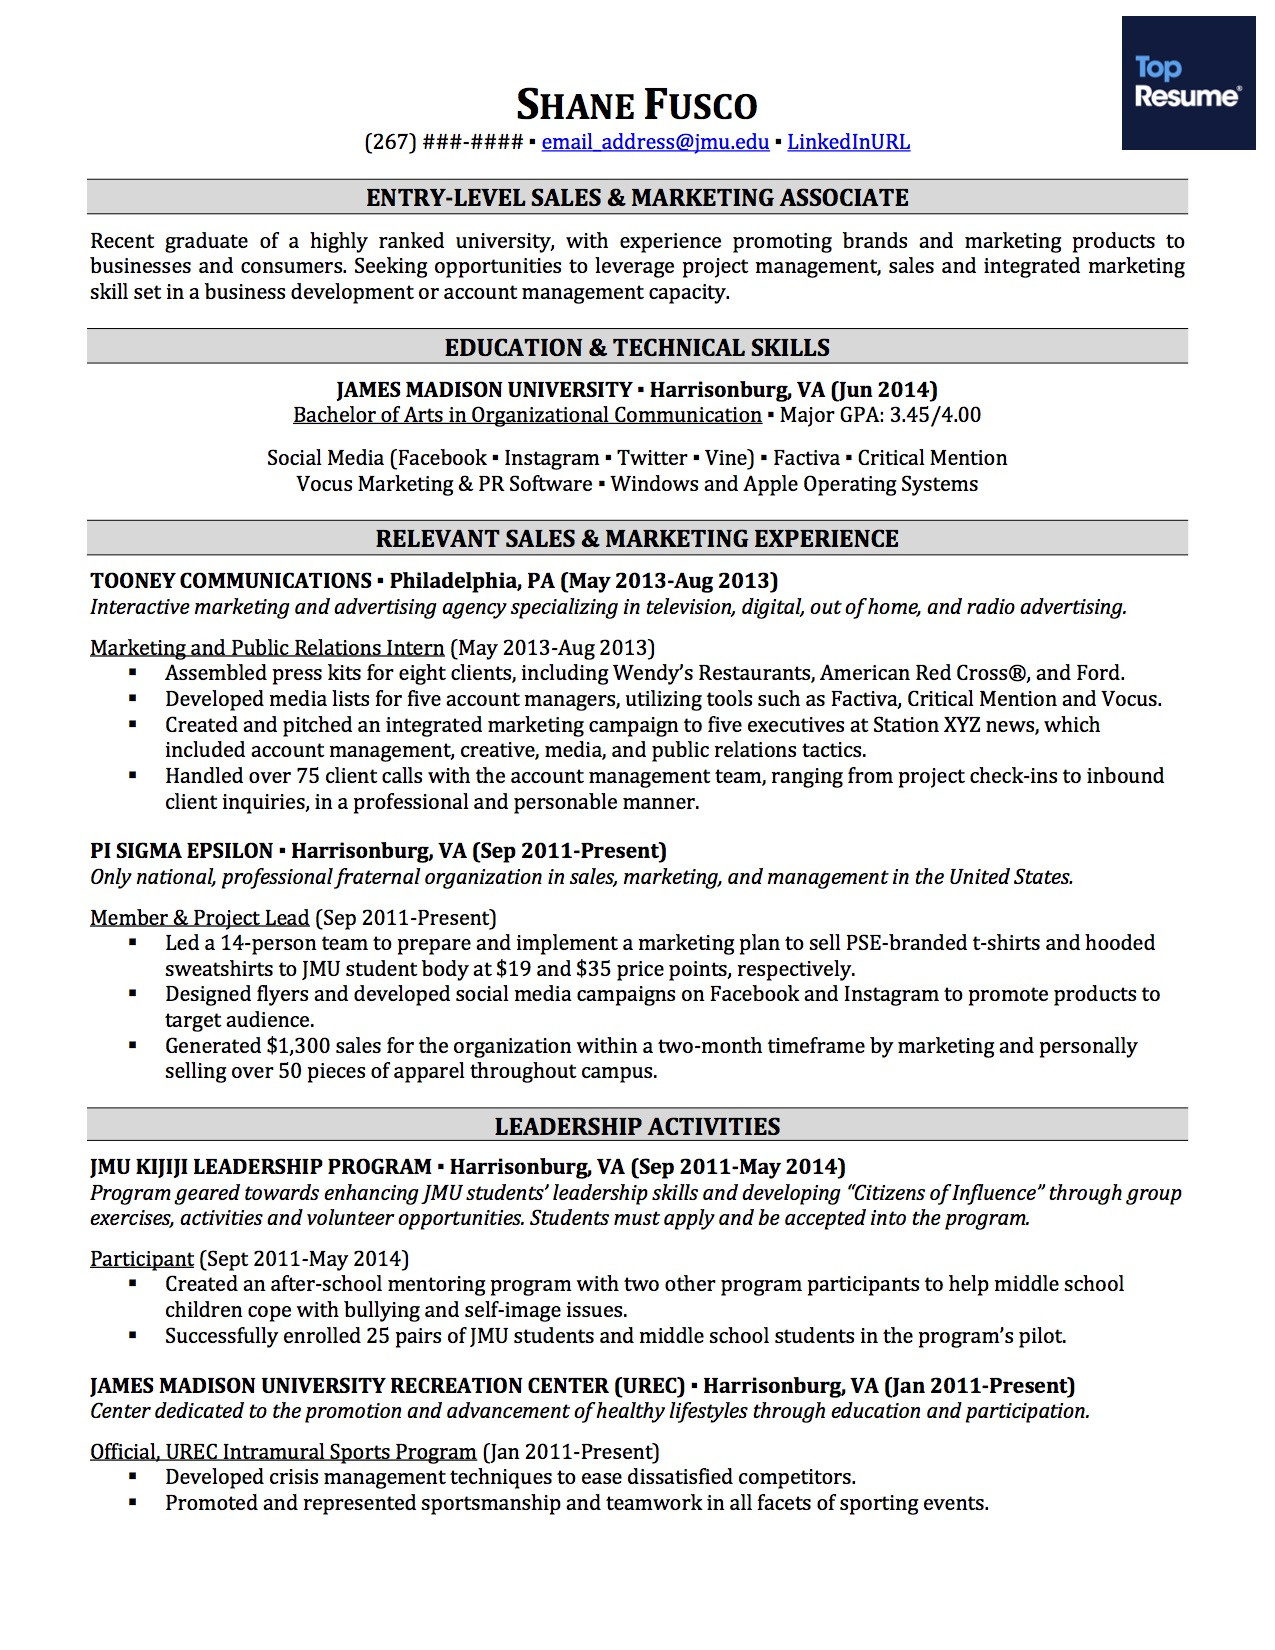 Entry Level Resume Samples for College Students How to Write A Resume with No Experience topresume